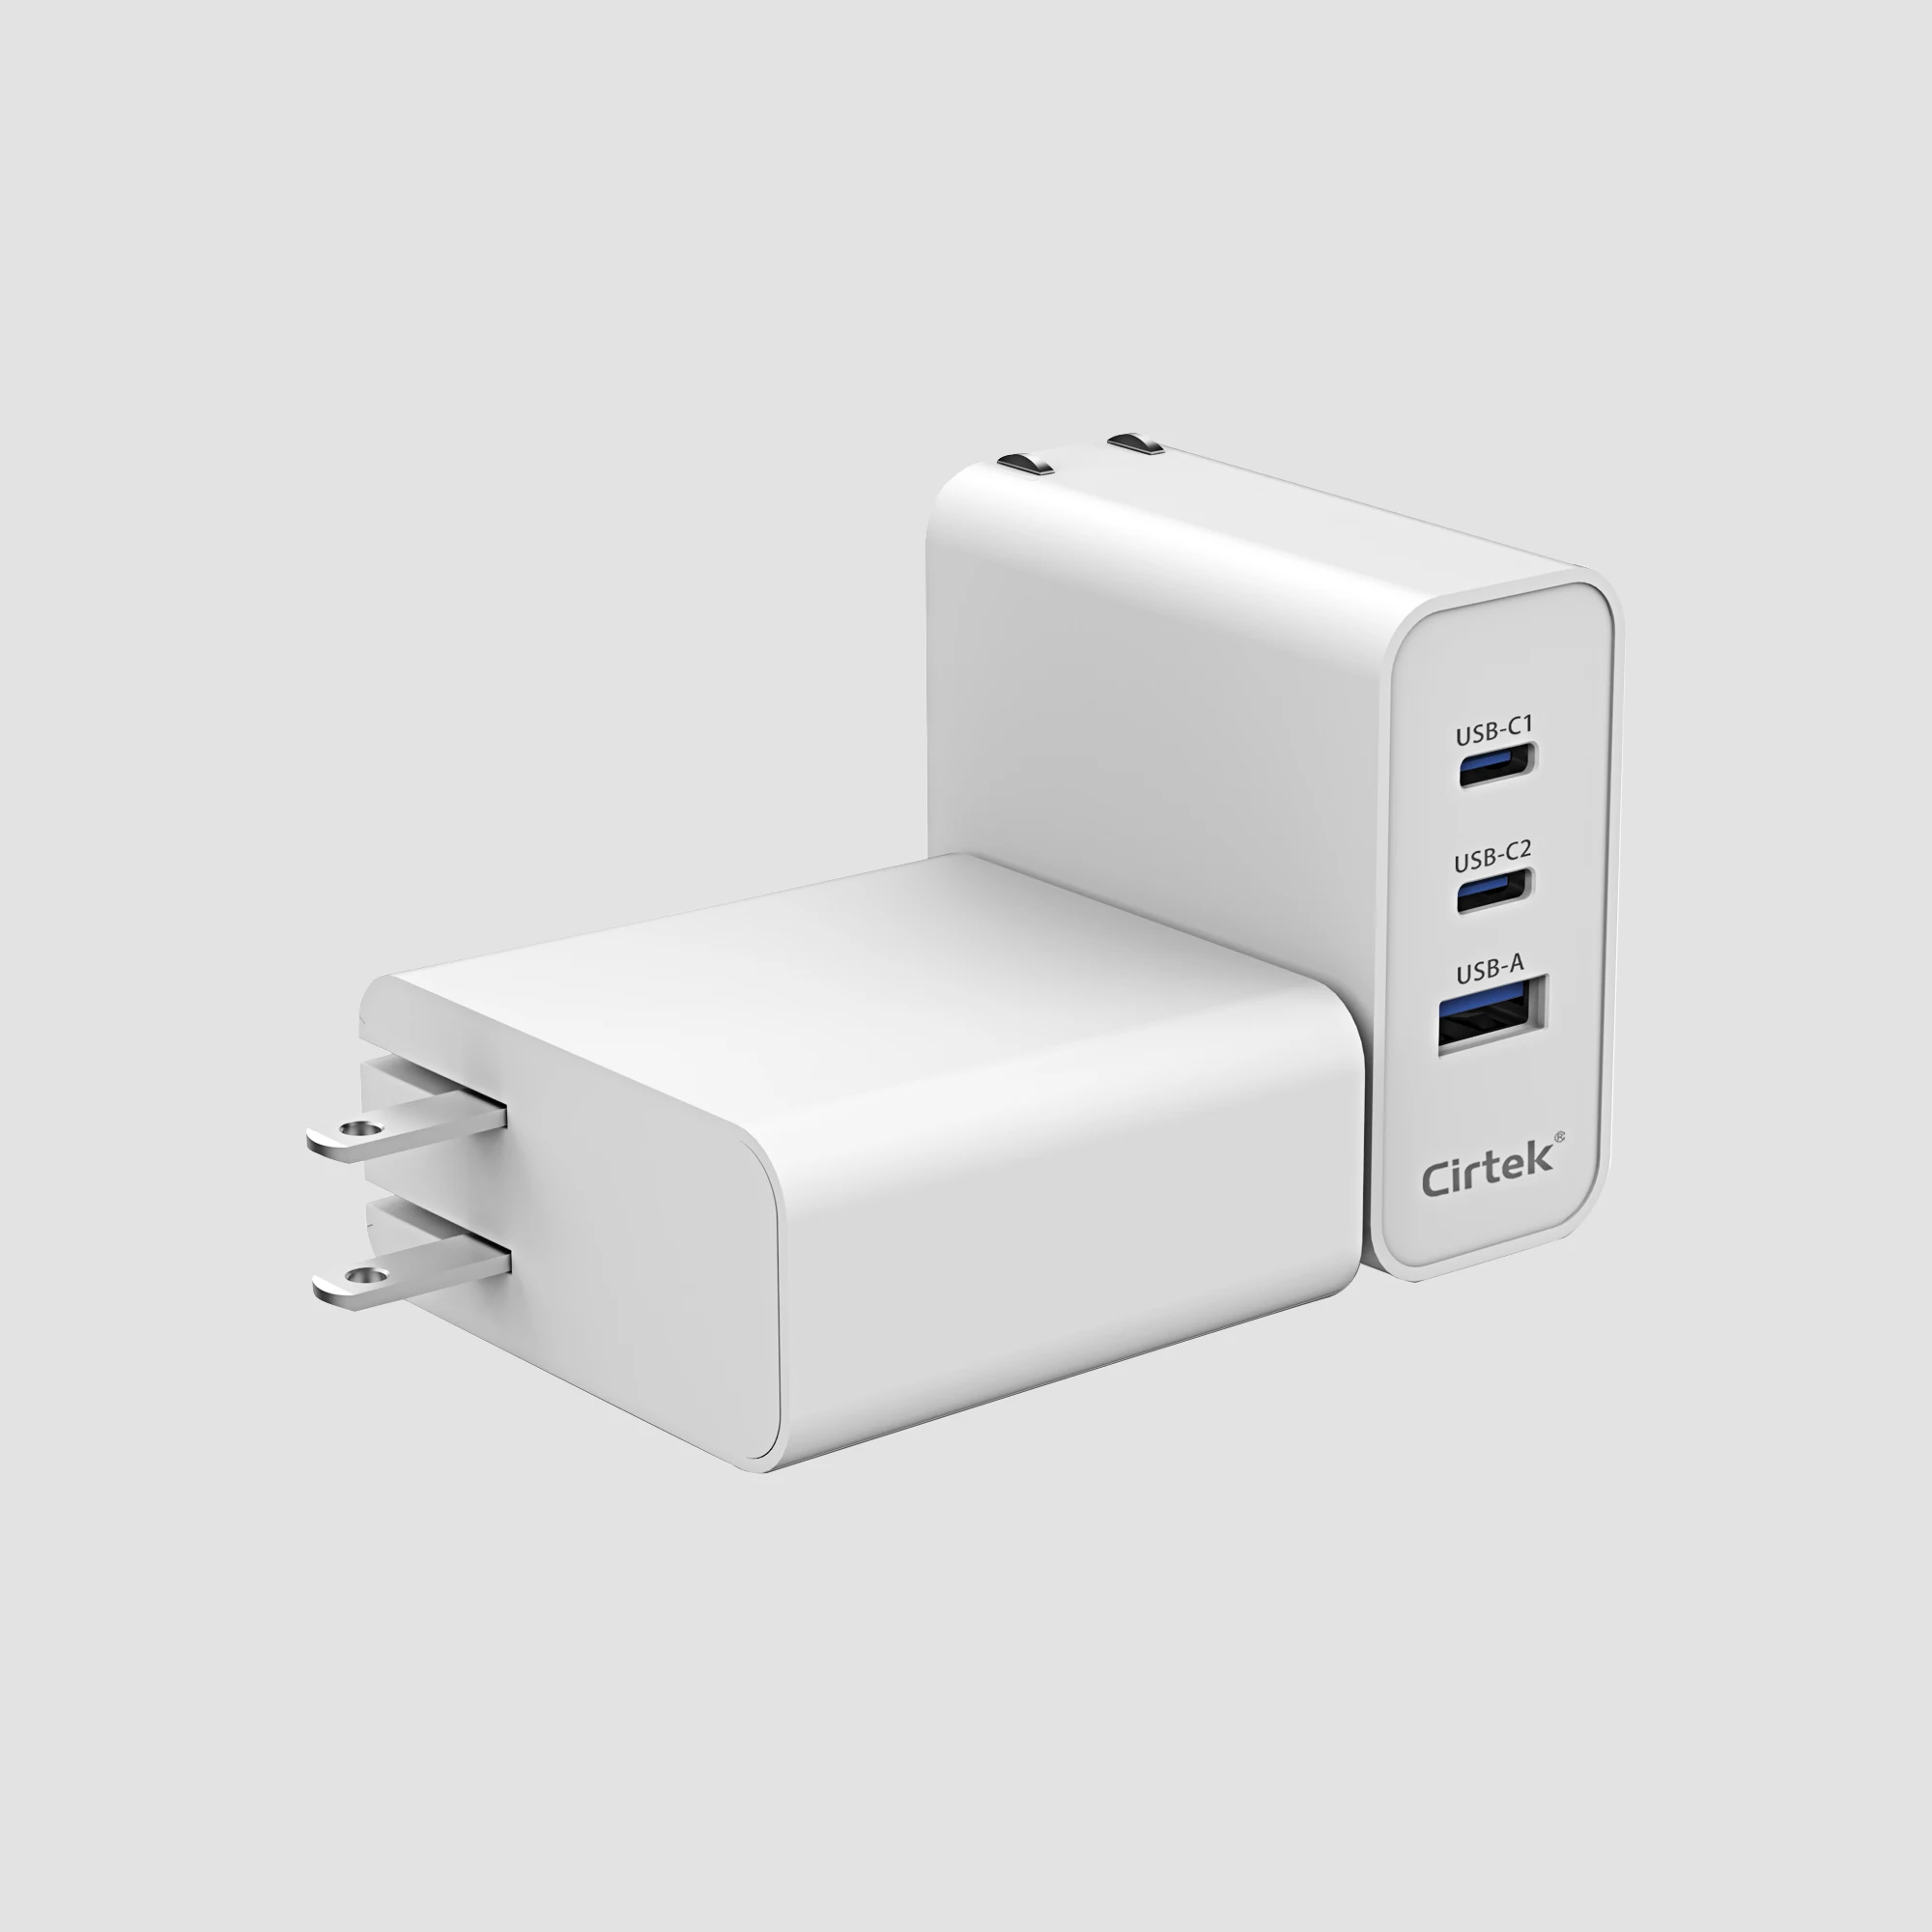 

Cirtek GaN 3 port interface usb c usb a fast charger RoHs CE FCC ETL certified 65w wall charger fast adapter, White